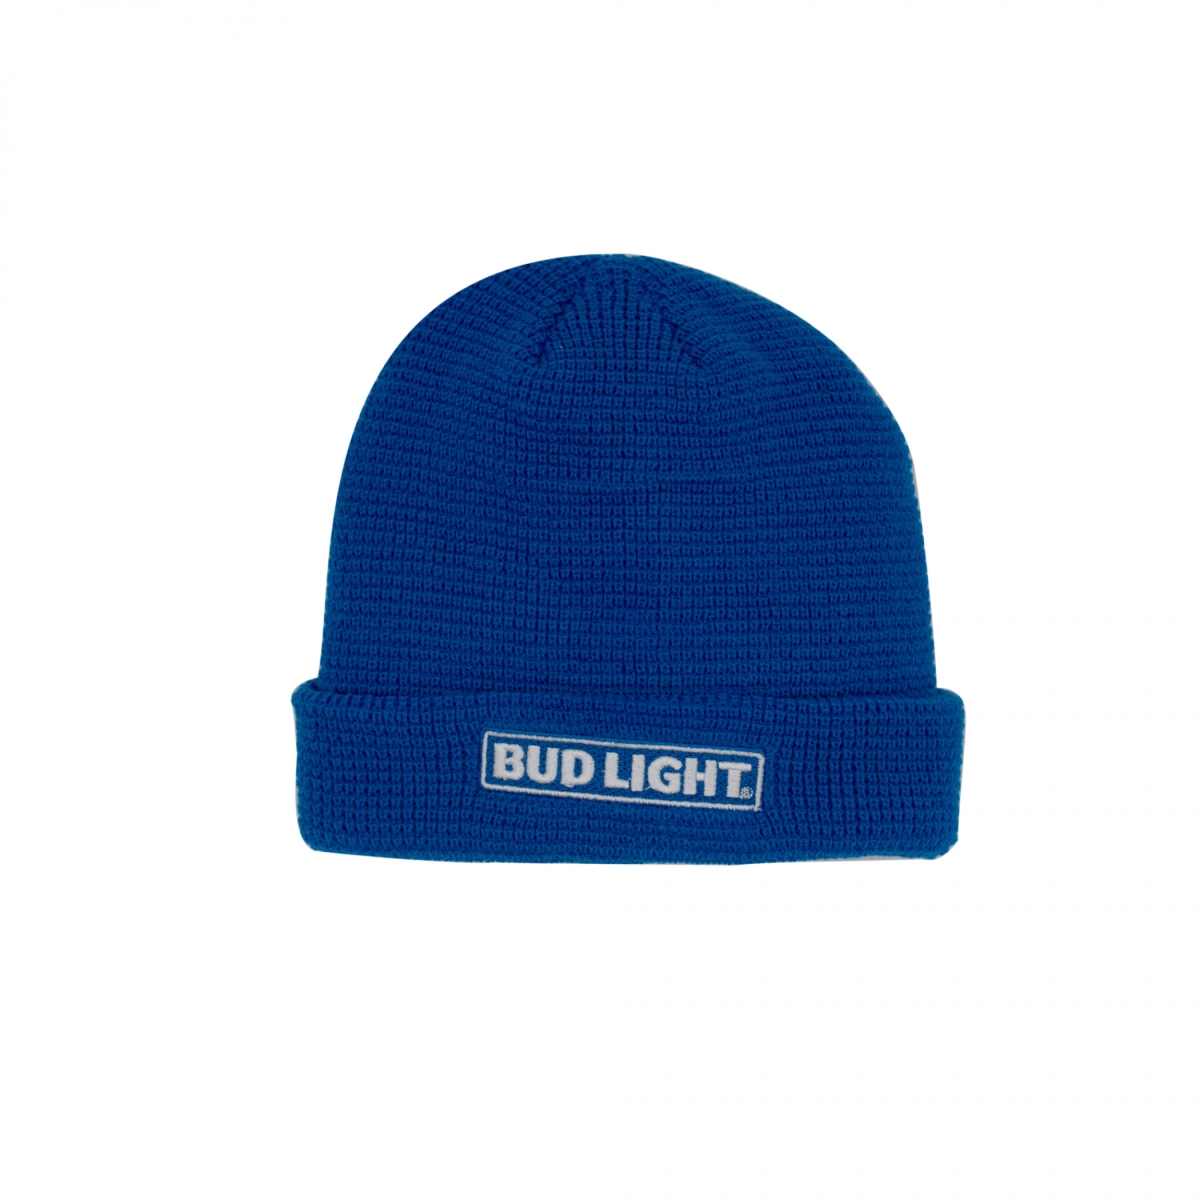 Picture of Bud Light 814178 Bud Light Label Patch Knit Cuff Beanie